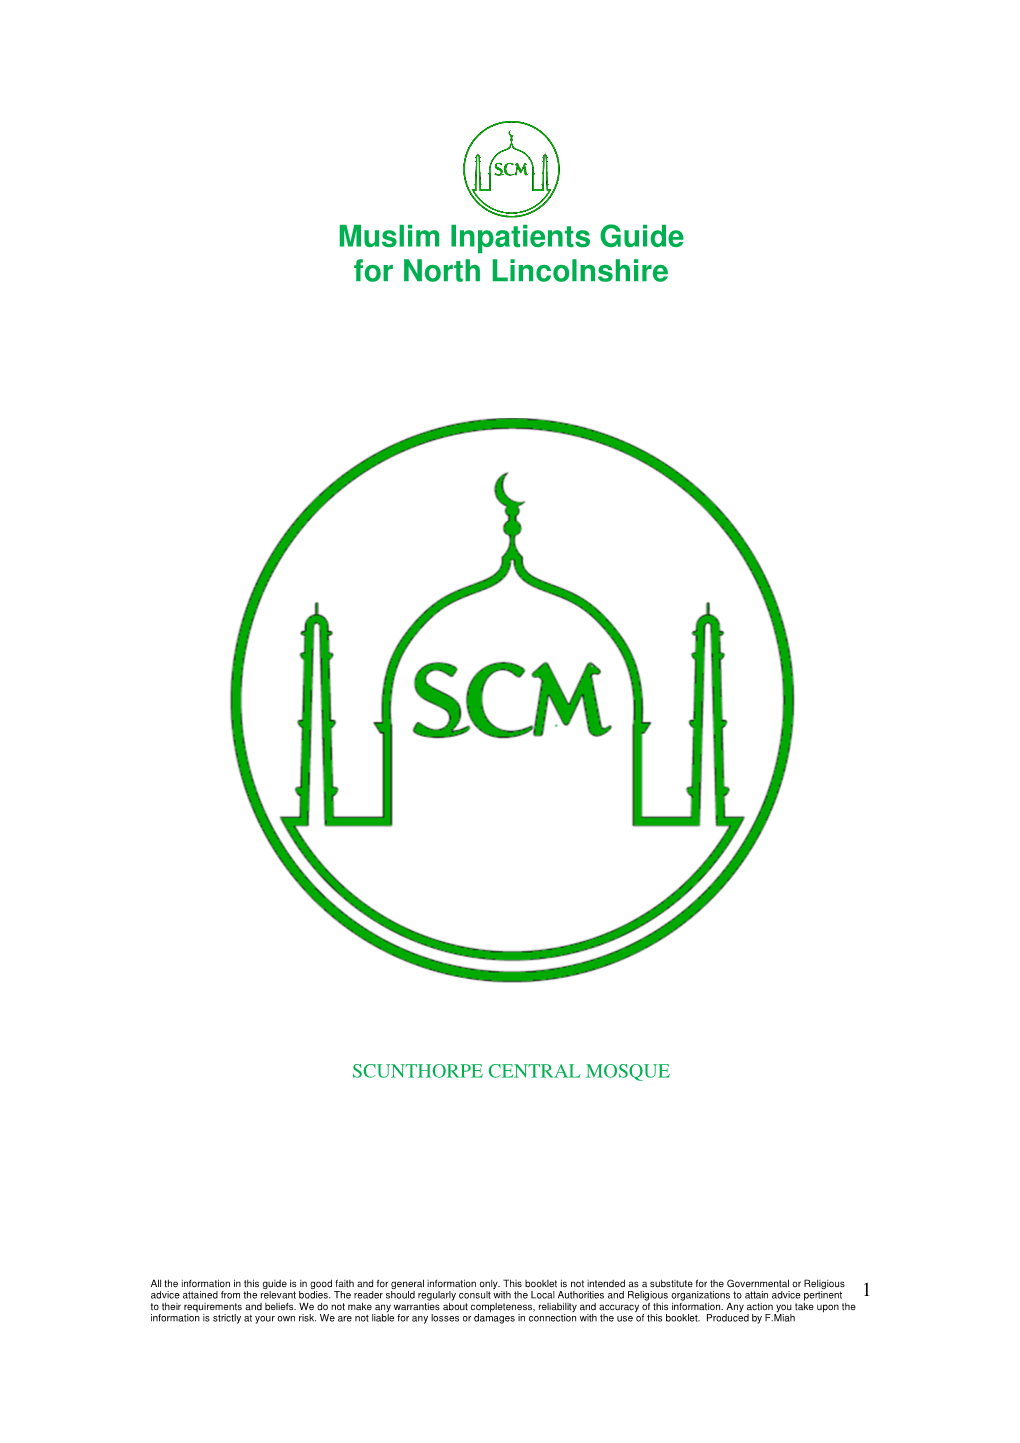 Muslim Inpatients Guide for North Lincolnshire